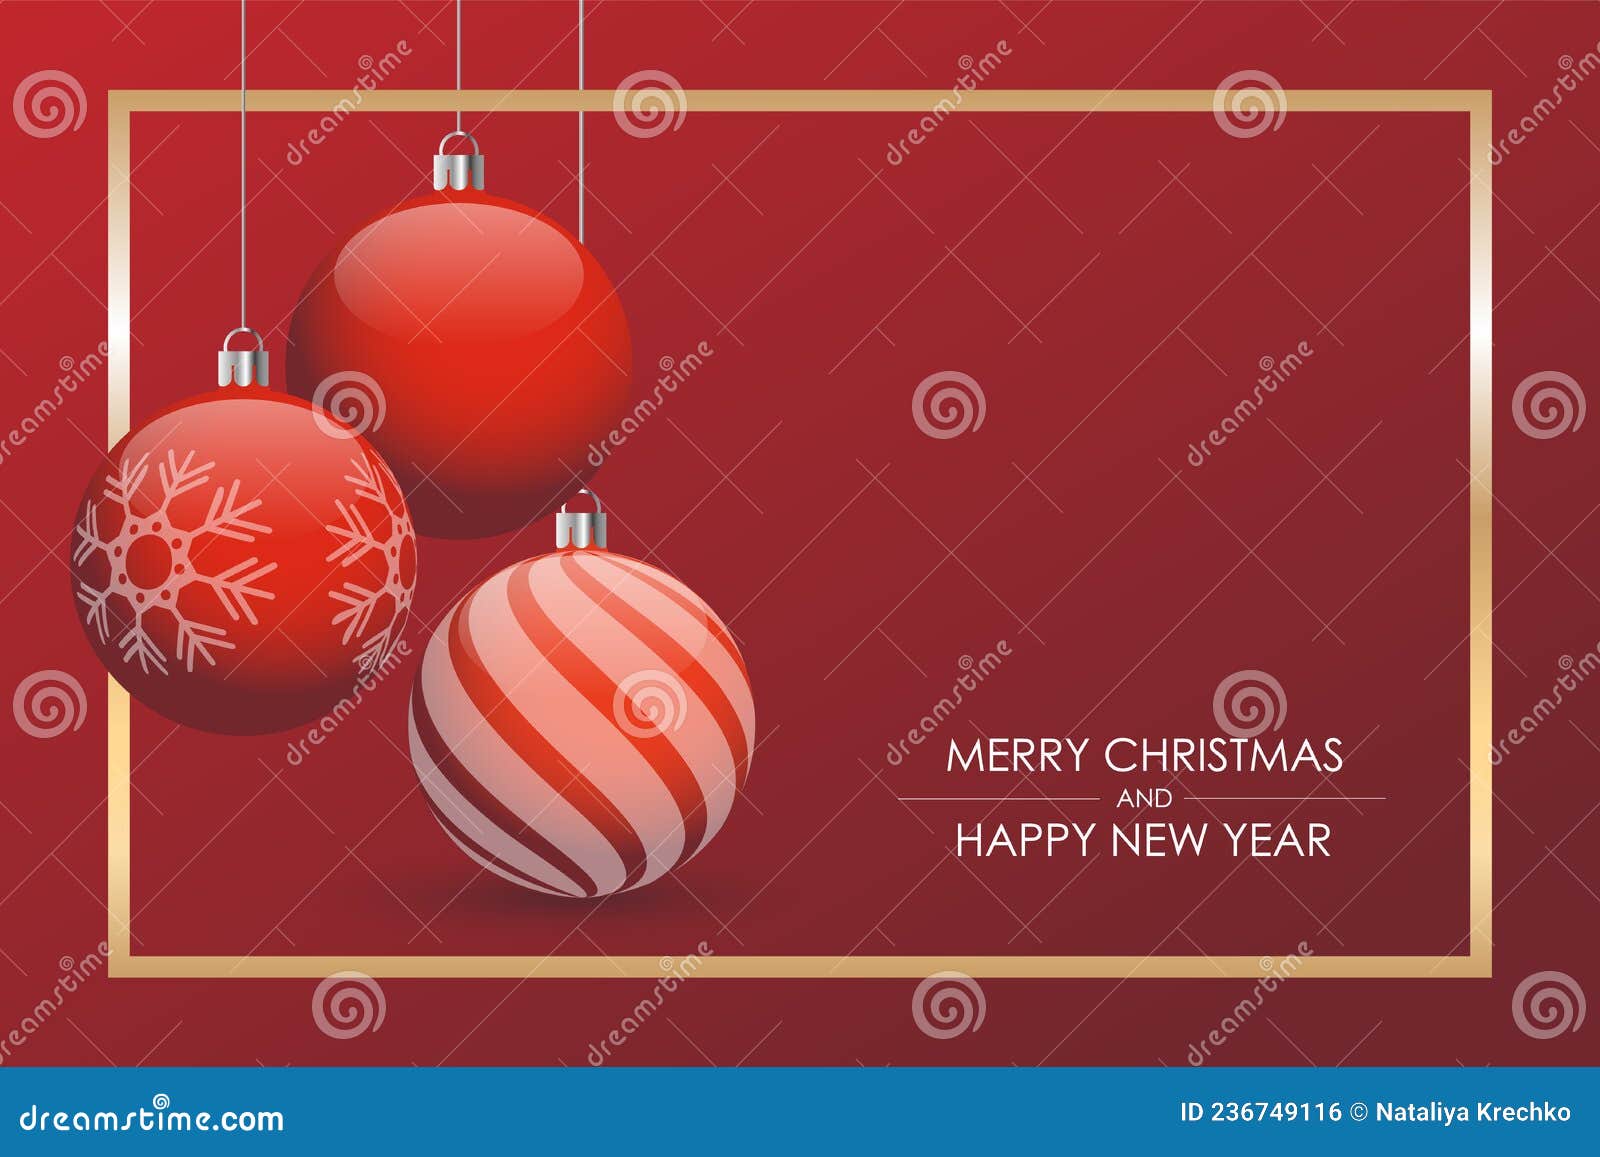 Red Christmas Card with Christmas Balls. Banner Design Stock Vector ...